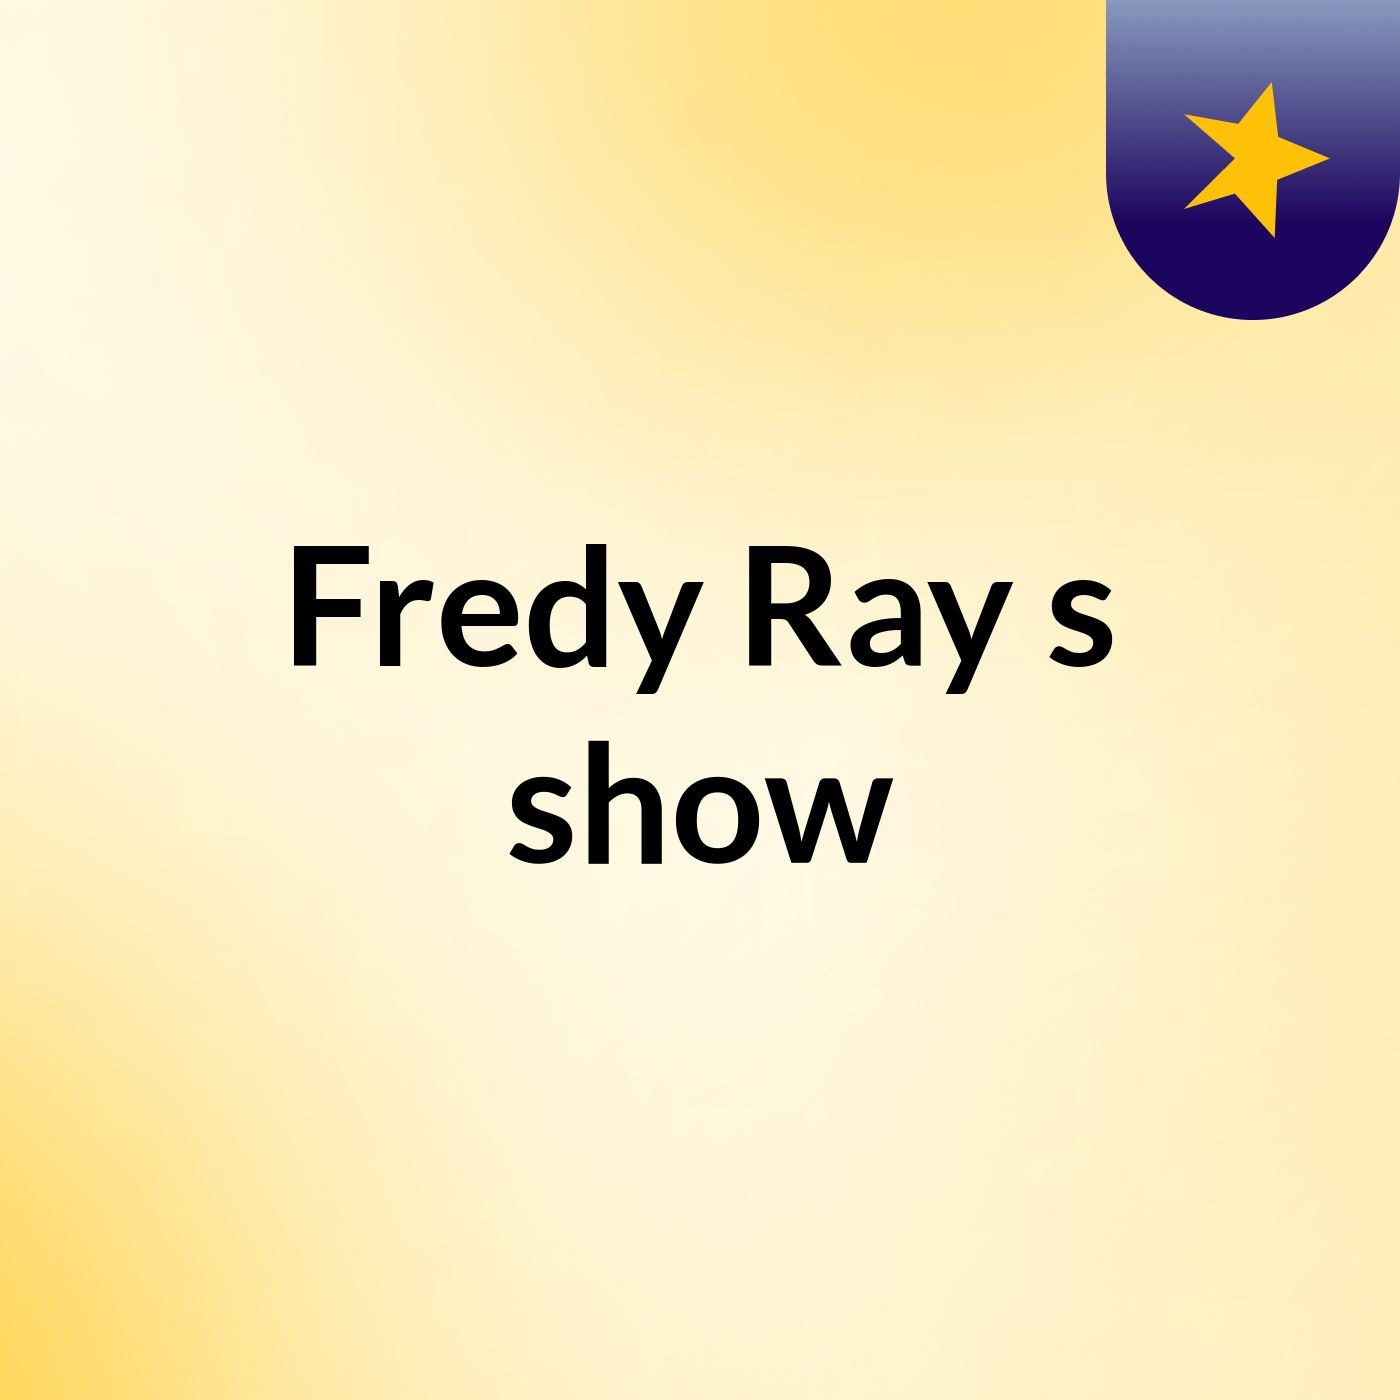 Fredy Ray's show